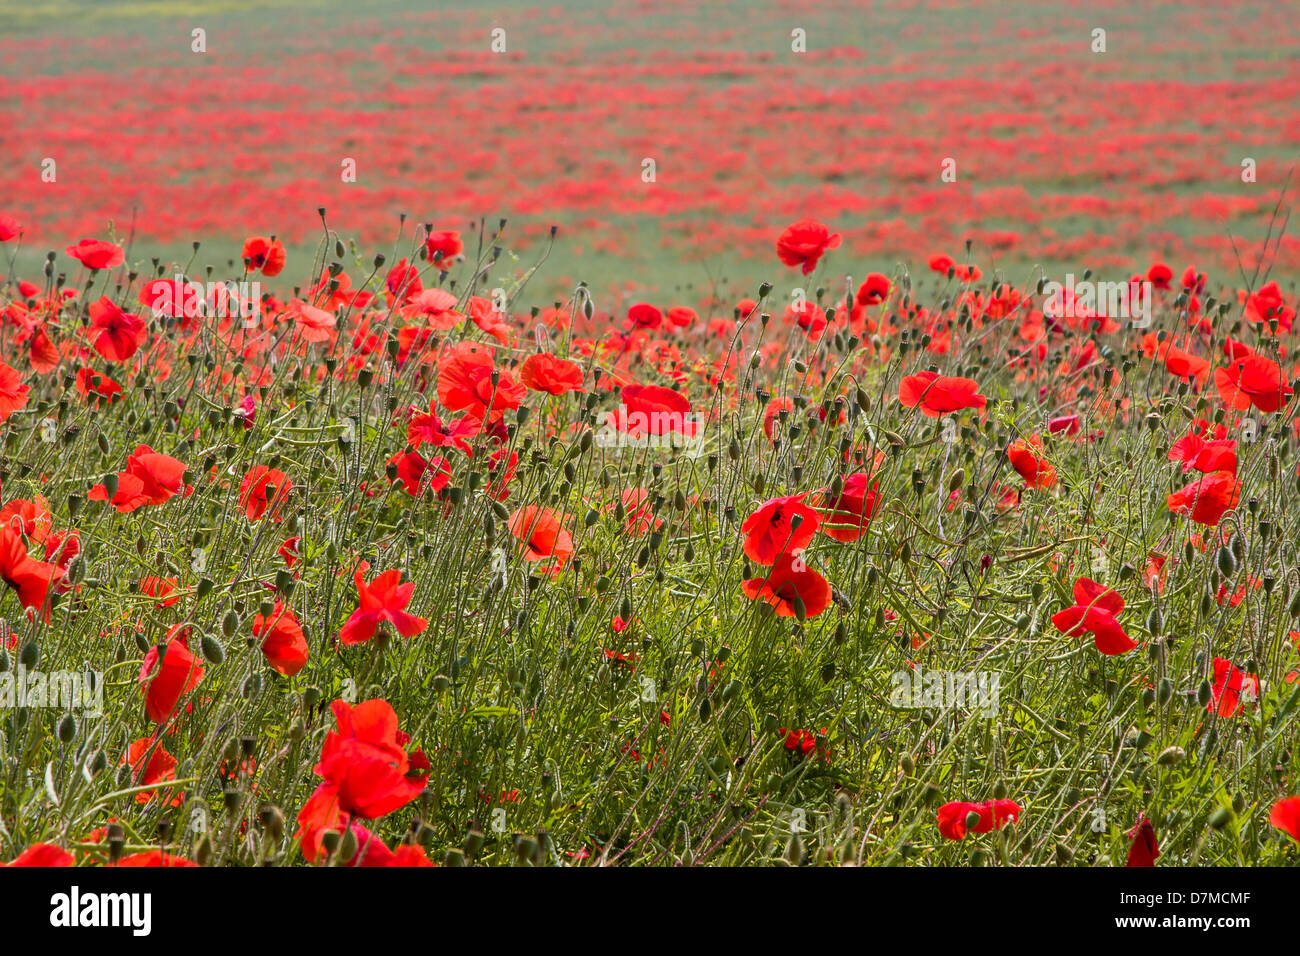 Red Poppies in field Stock Photo